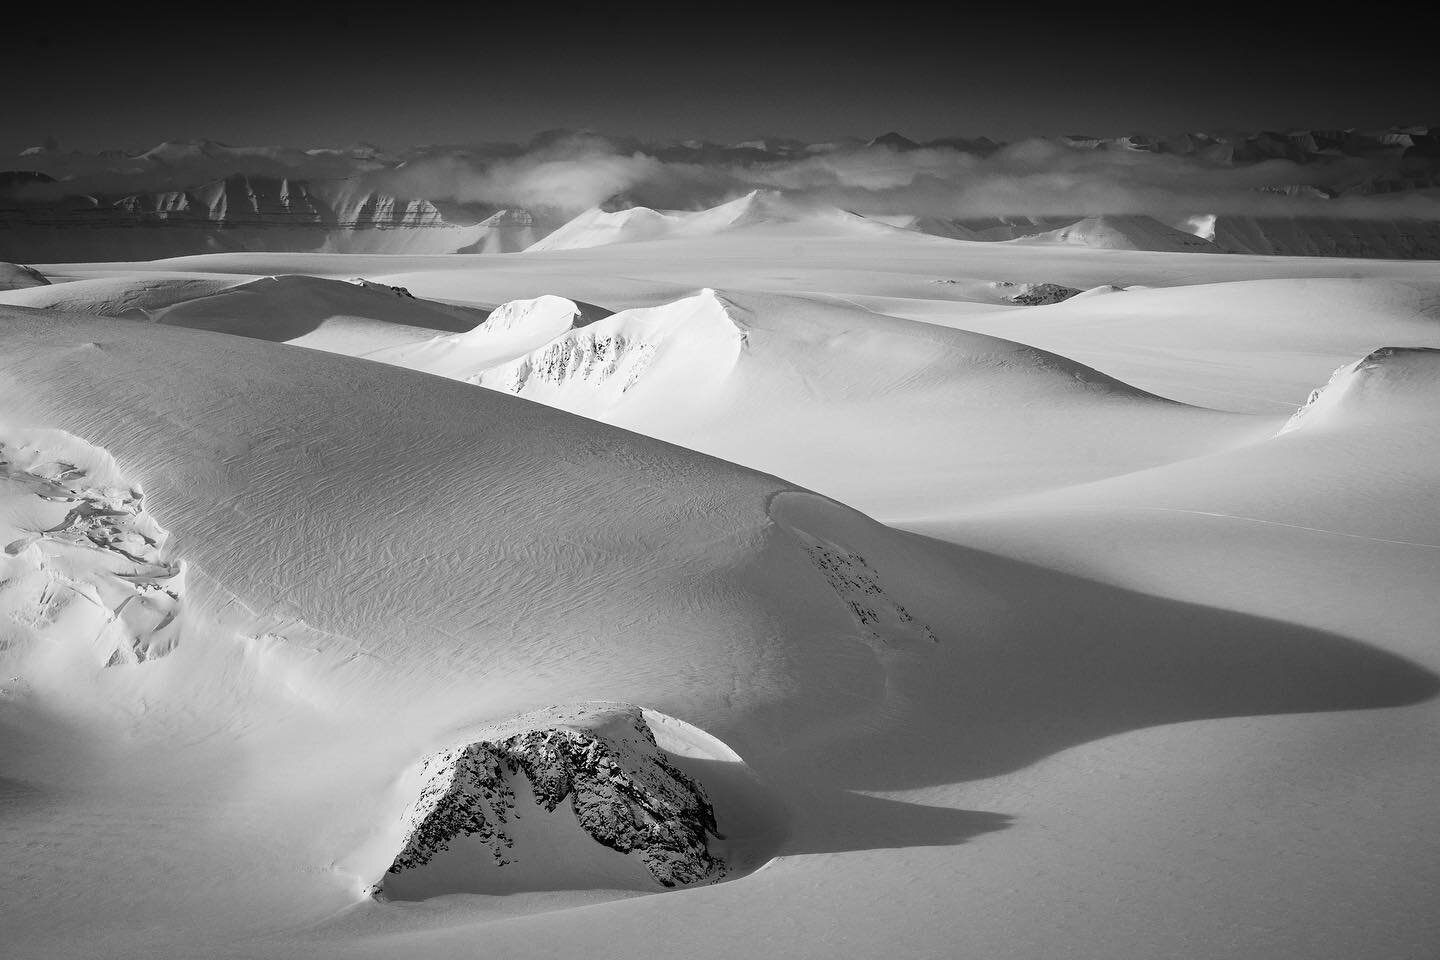 I find black and white images challenging to get right especially with natural light but I am quite happy with this one. What do you think? 

#svalbard #visitsvalbard #visitnorway #norway #blackandwhitephotography #bw #blackandwhite #mountains #mount